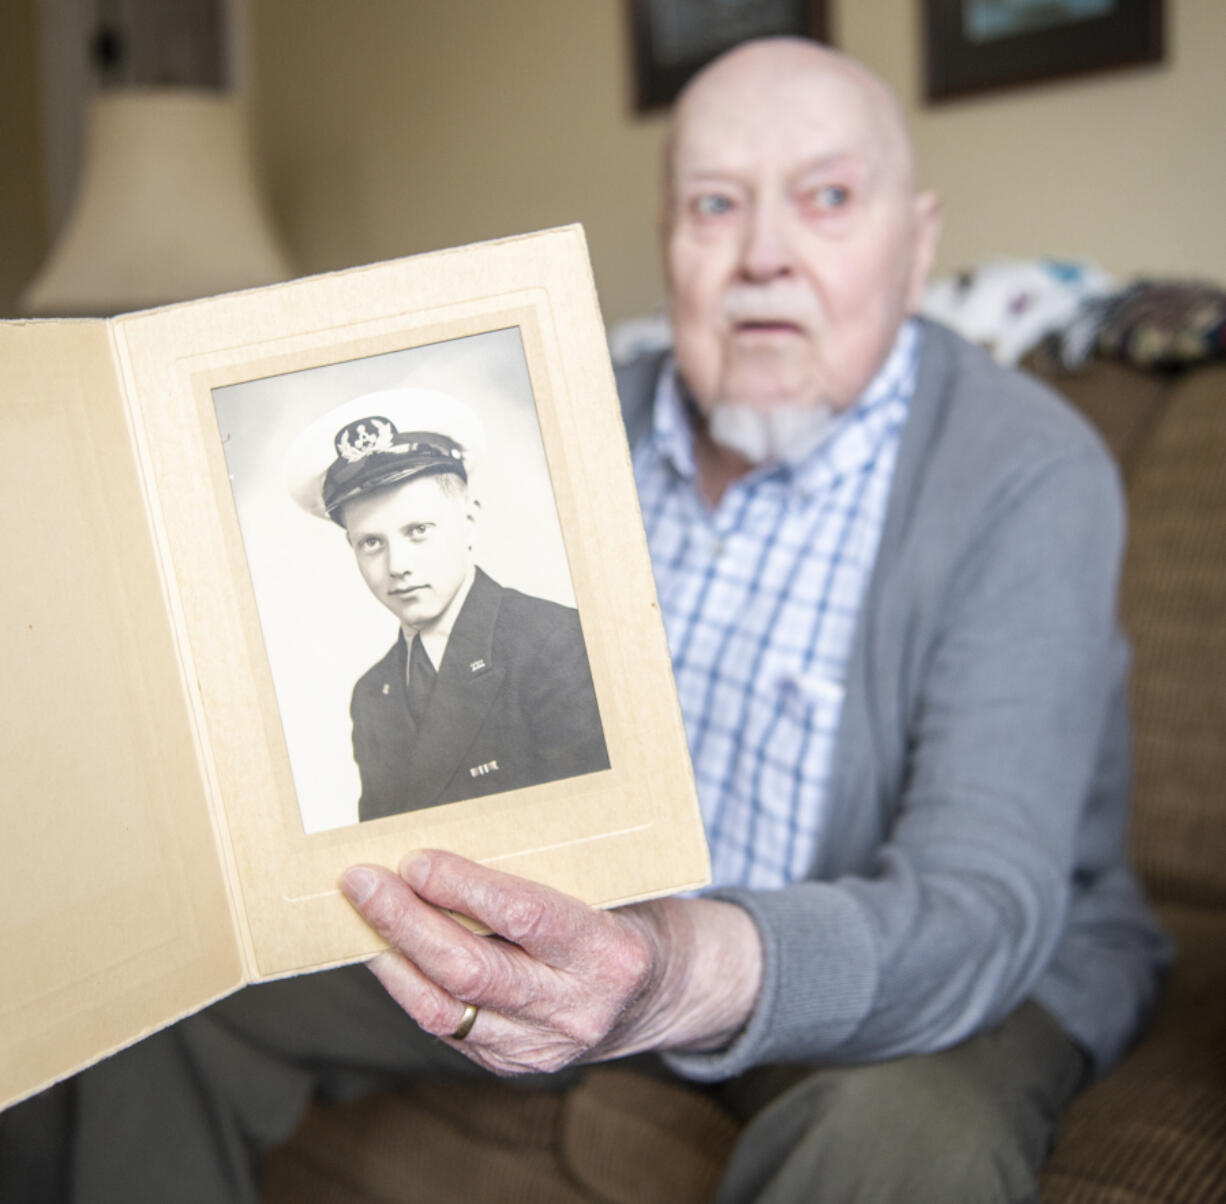 World War II veteran Julian &ldquo;Thorne&rdquo; Hilts displays a photo of himself when he was a commissioned Navy officer.